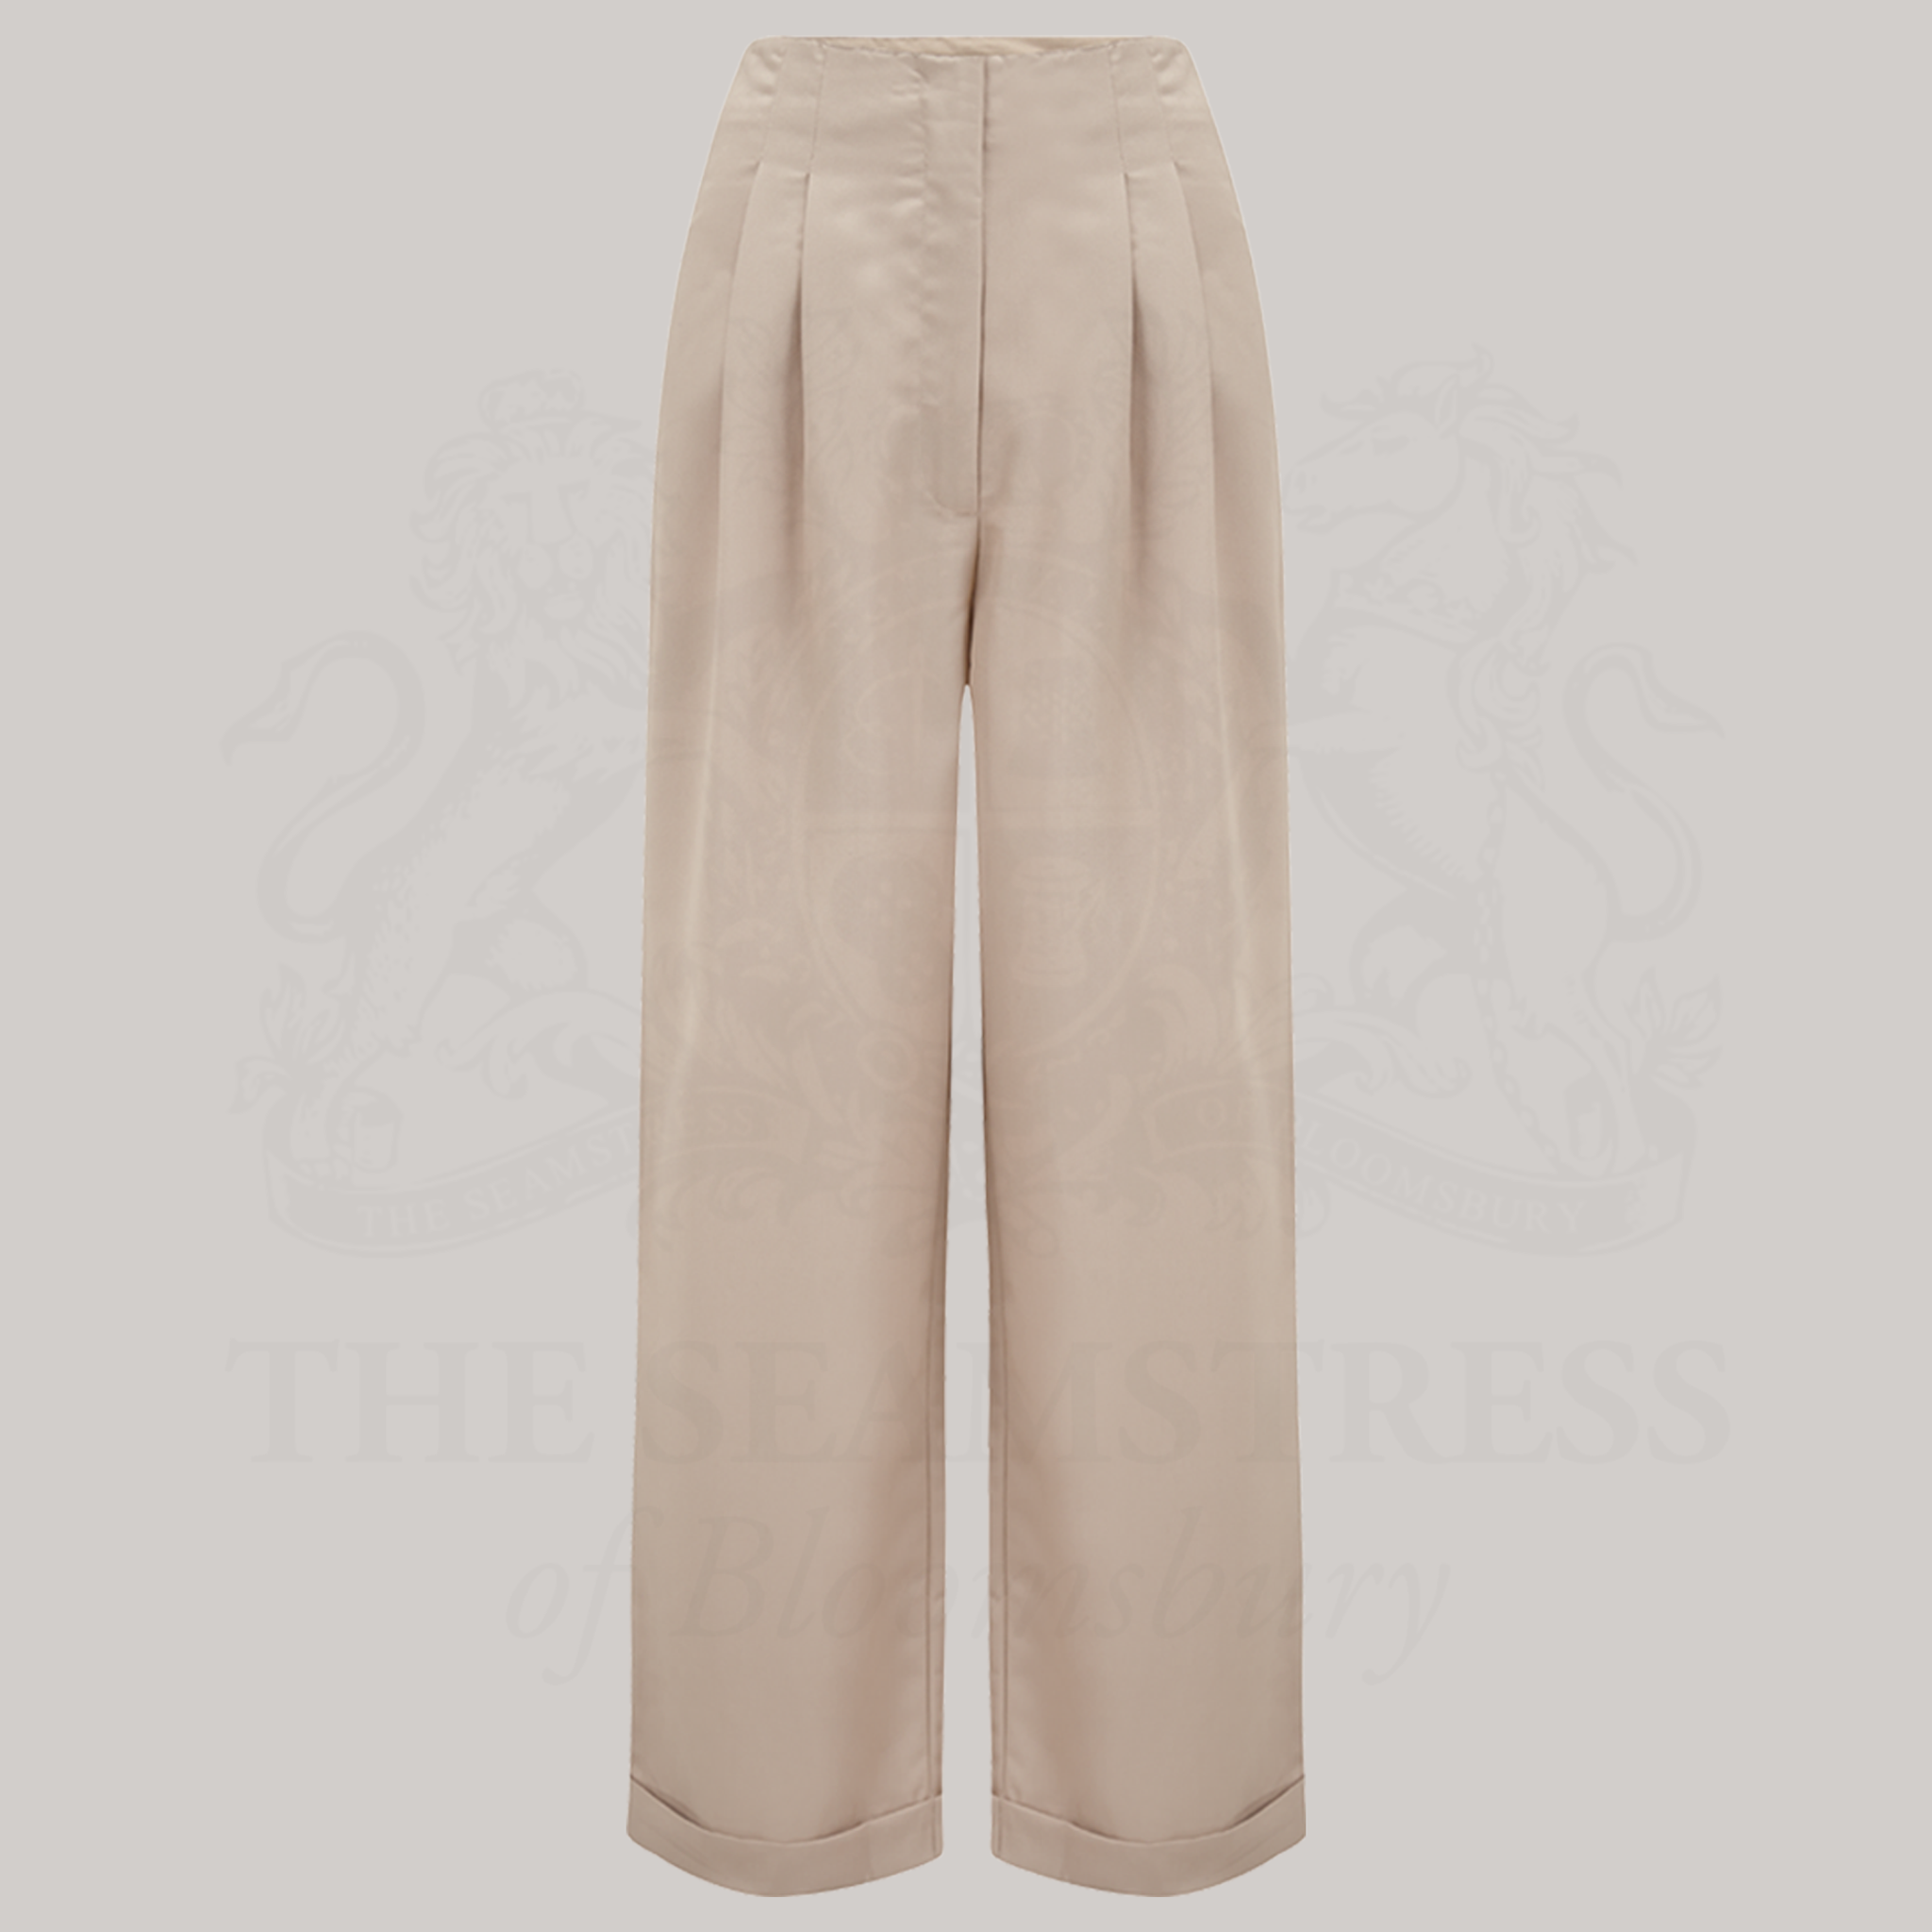 Tailored Audrey Trousers Stone  Vintage 1940s Style Women's